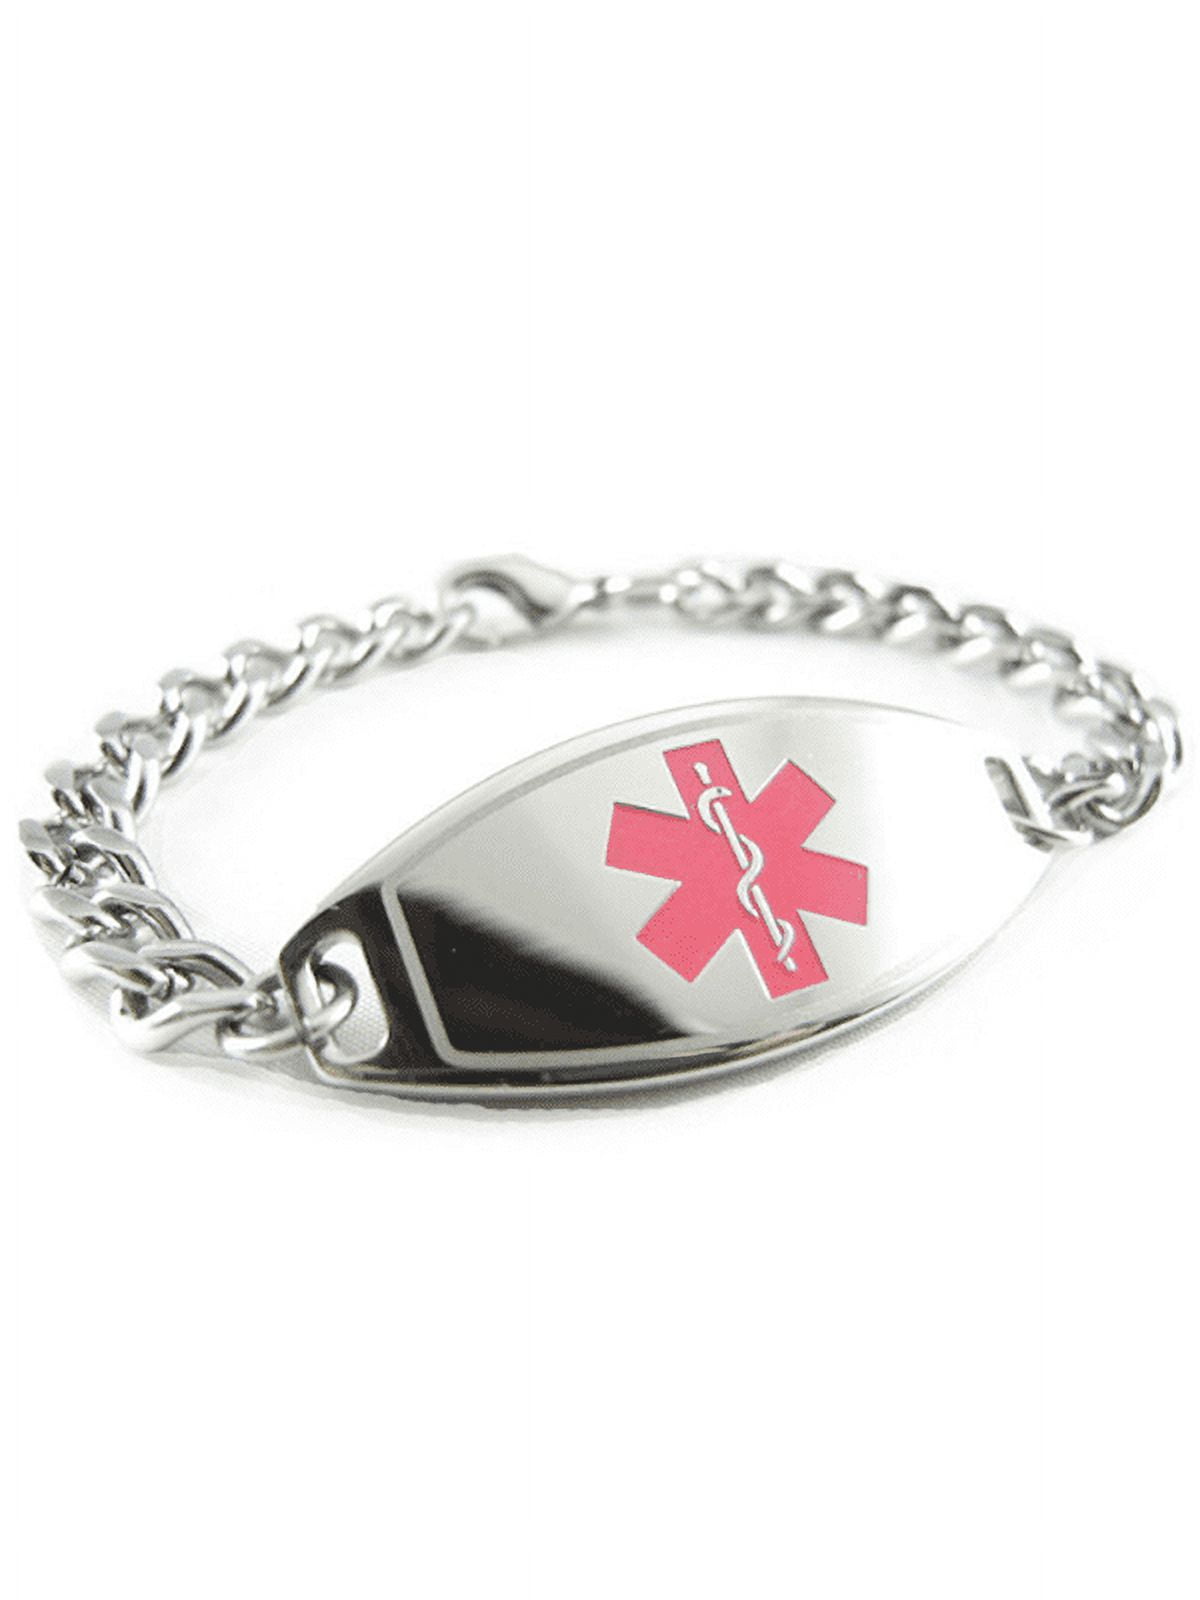 Small Stainless ID Bracelet - Engraved Front And Back – Medic-ID